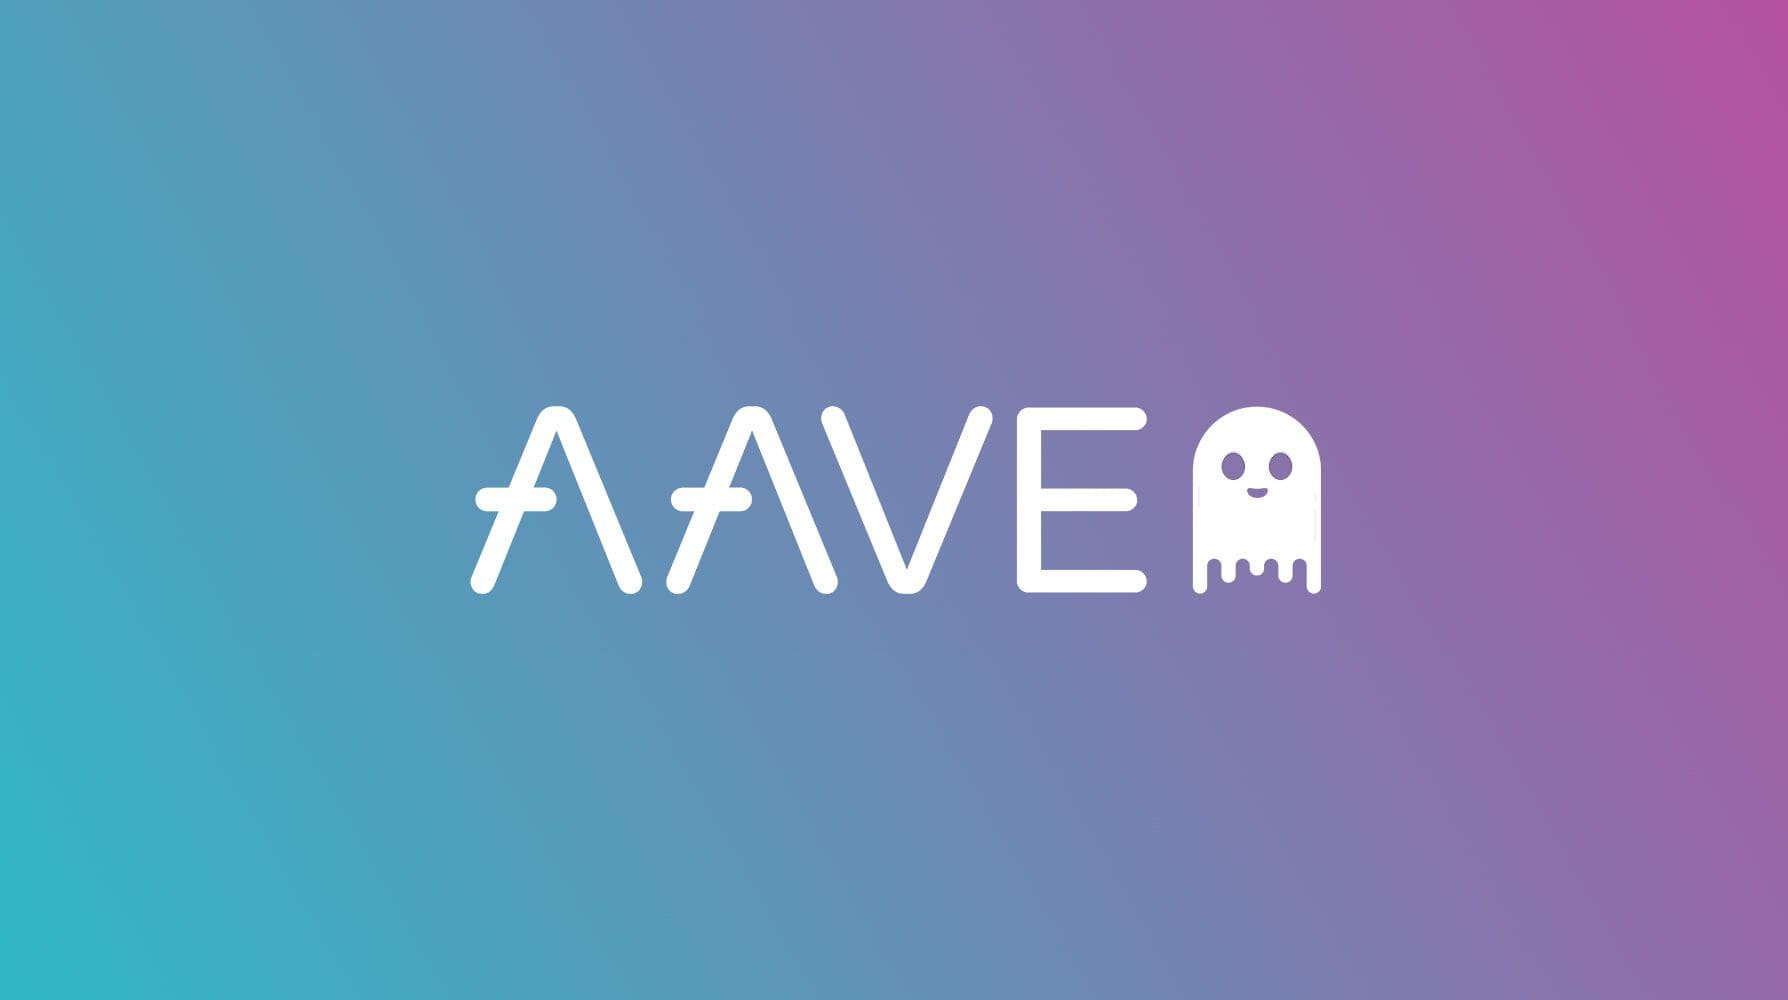 Aave: in arrivo la nuova stablecoin GHO